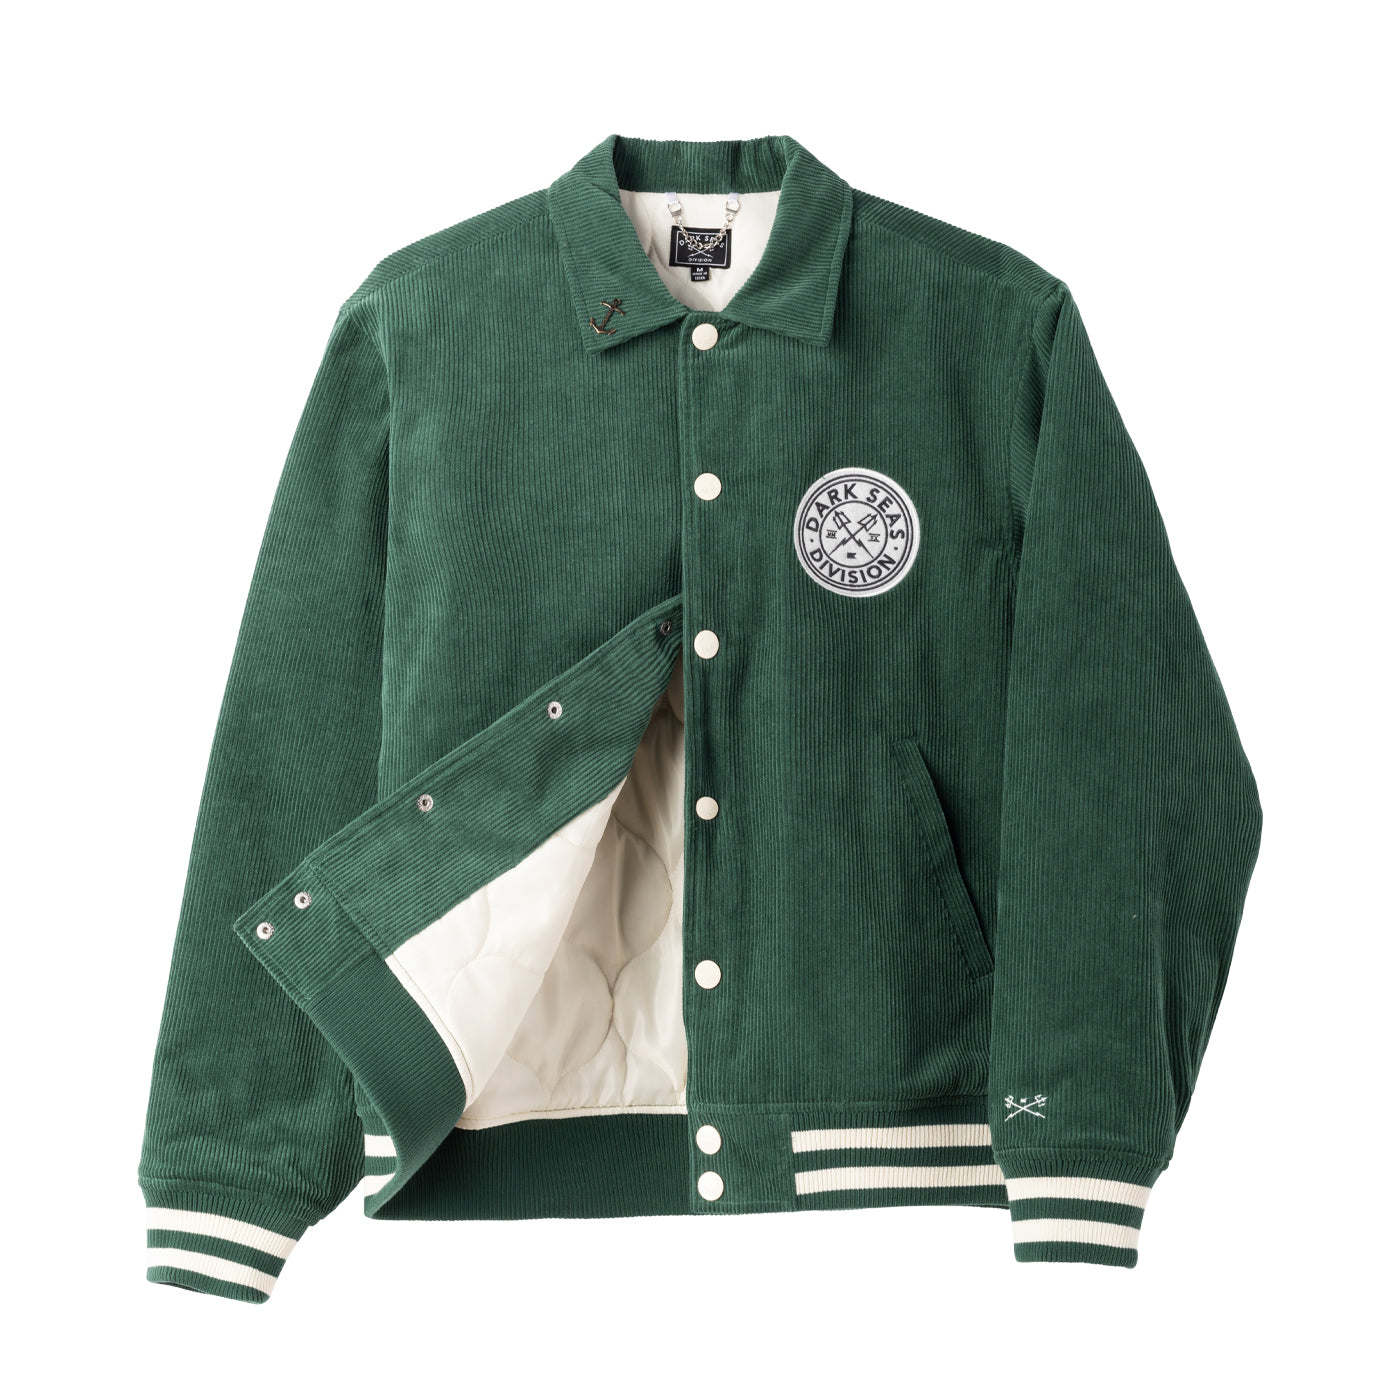 Lacoste varsity jacket in navy with patches and back print | ASOS